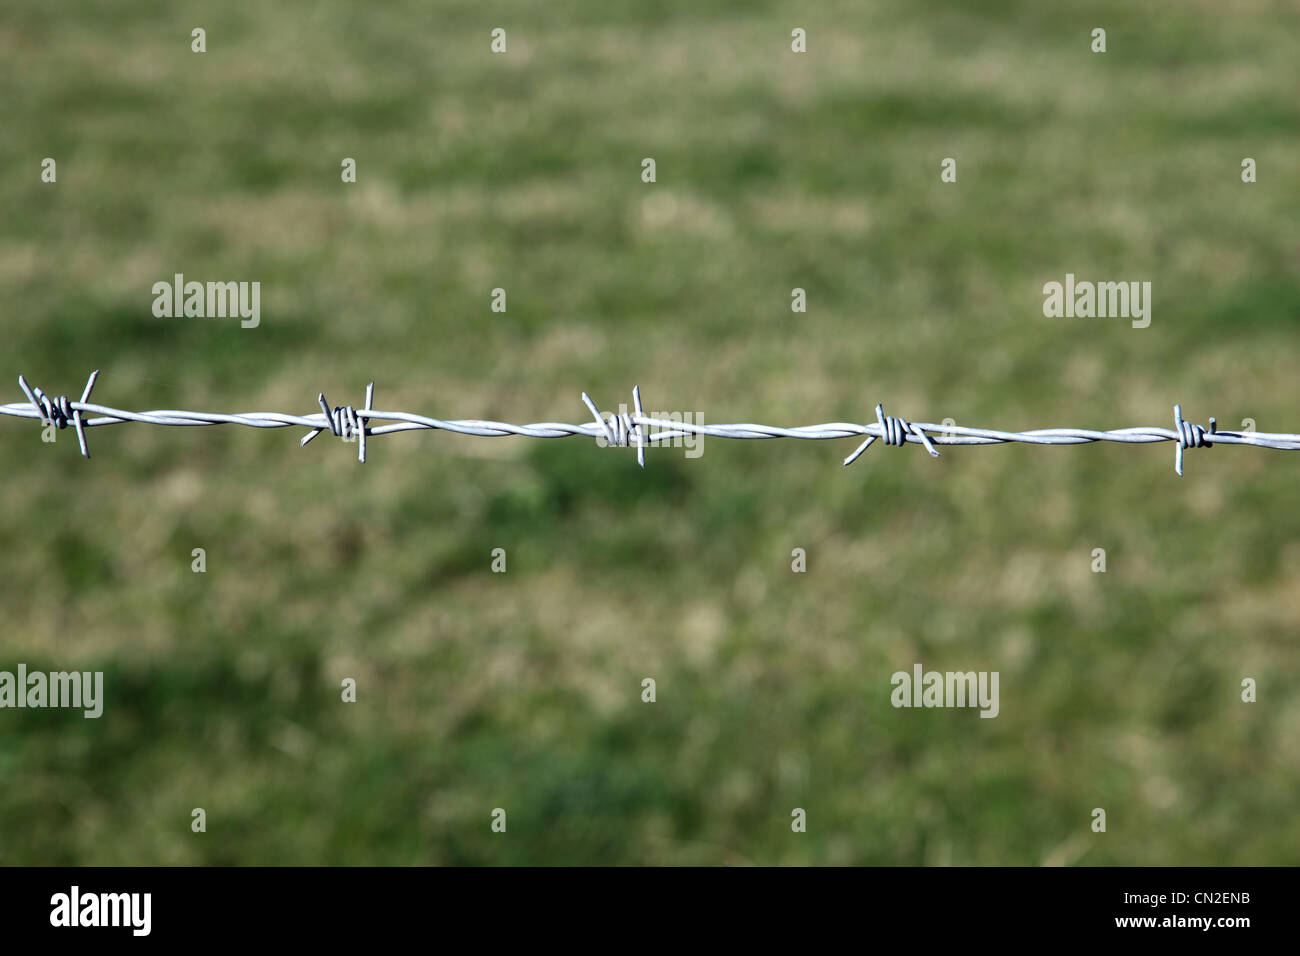 Barbed wire fence against grass. Stock Photo